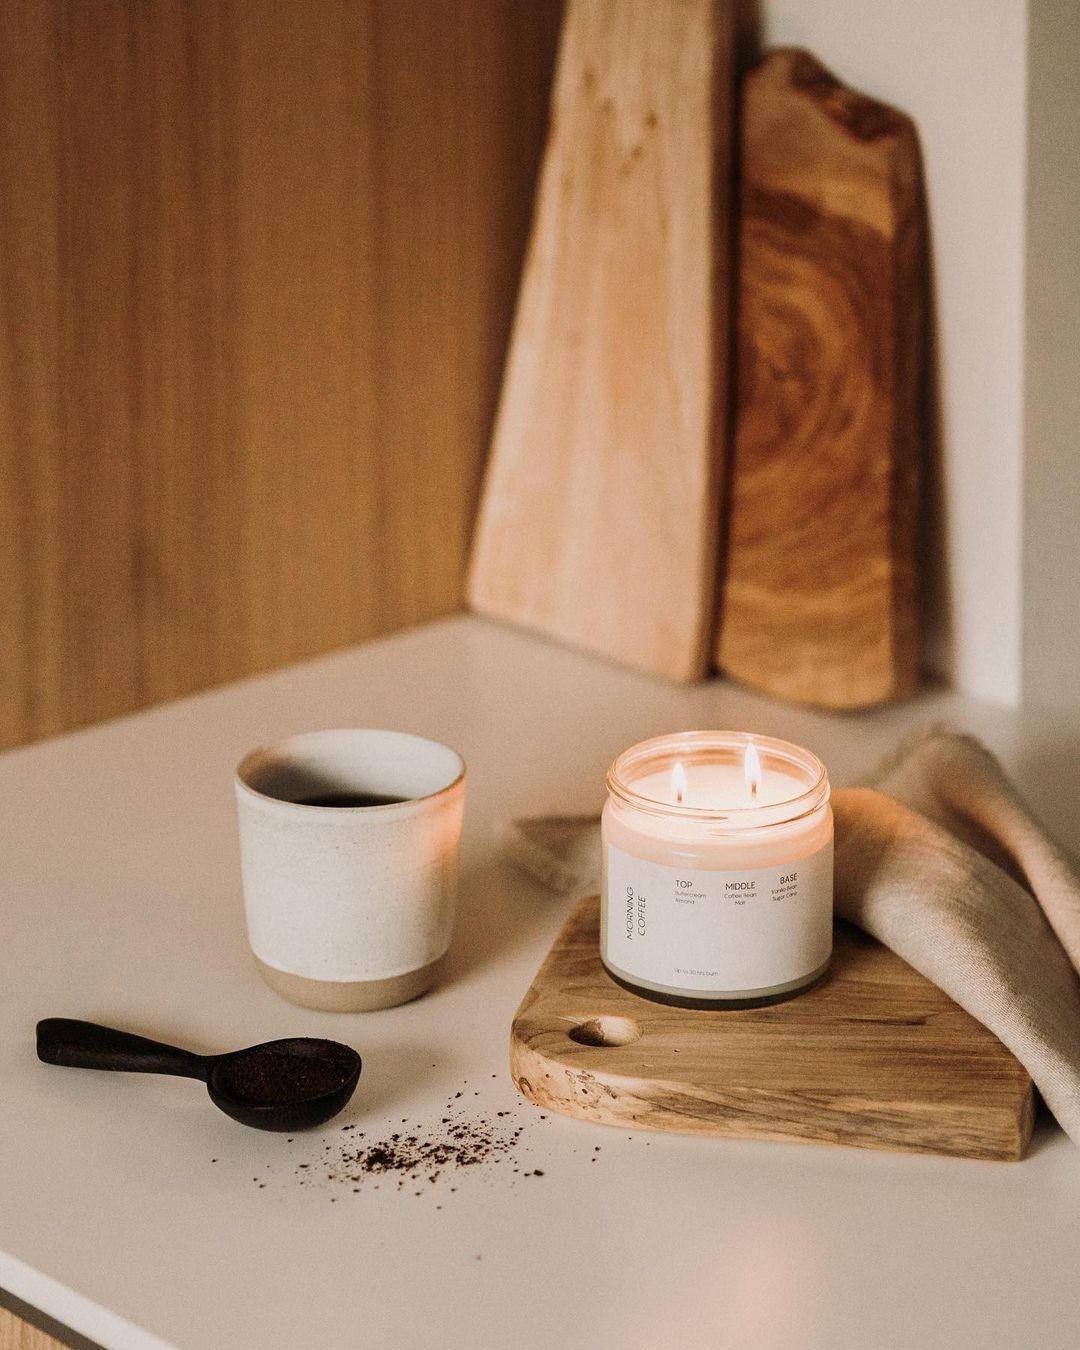 2. Vegan Candles: Ethical Ambiance